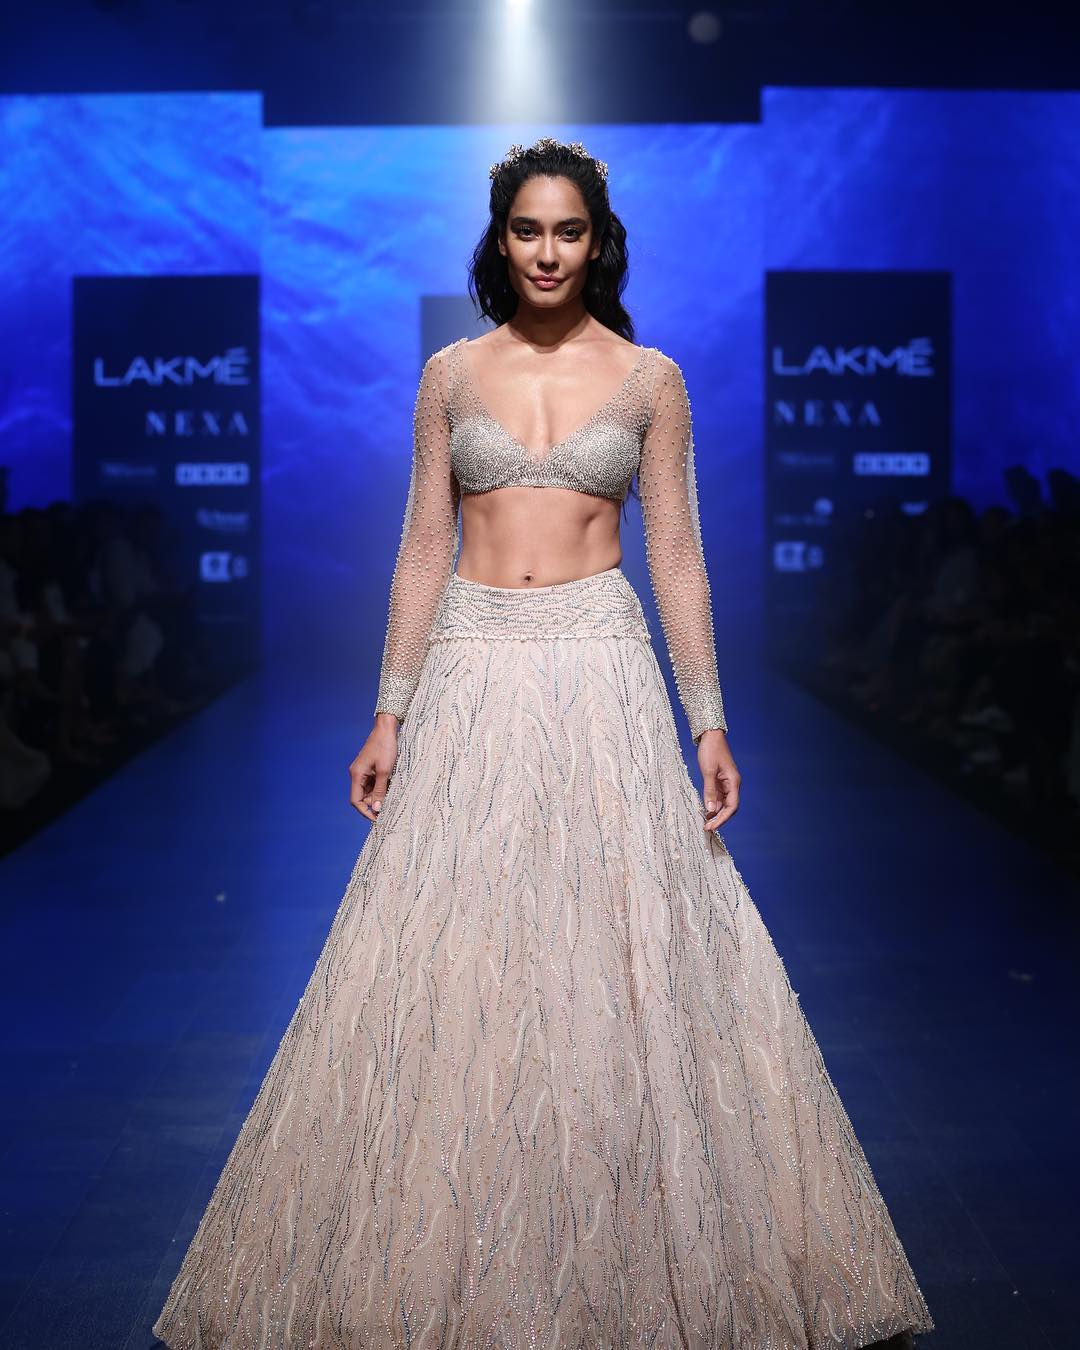 11 Best Looks We Spotted At Lakme Fashion Week 2019